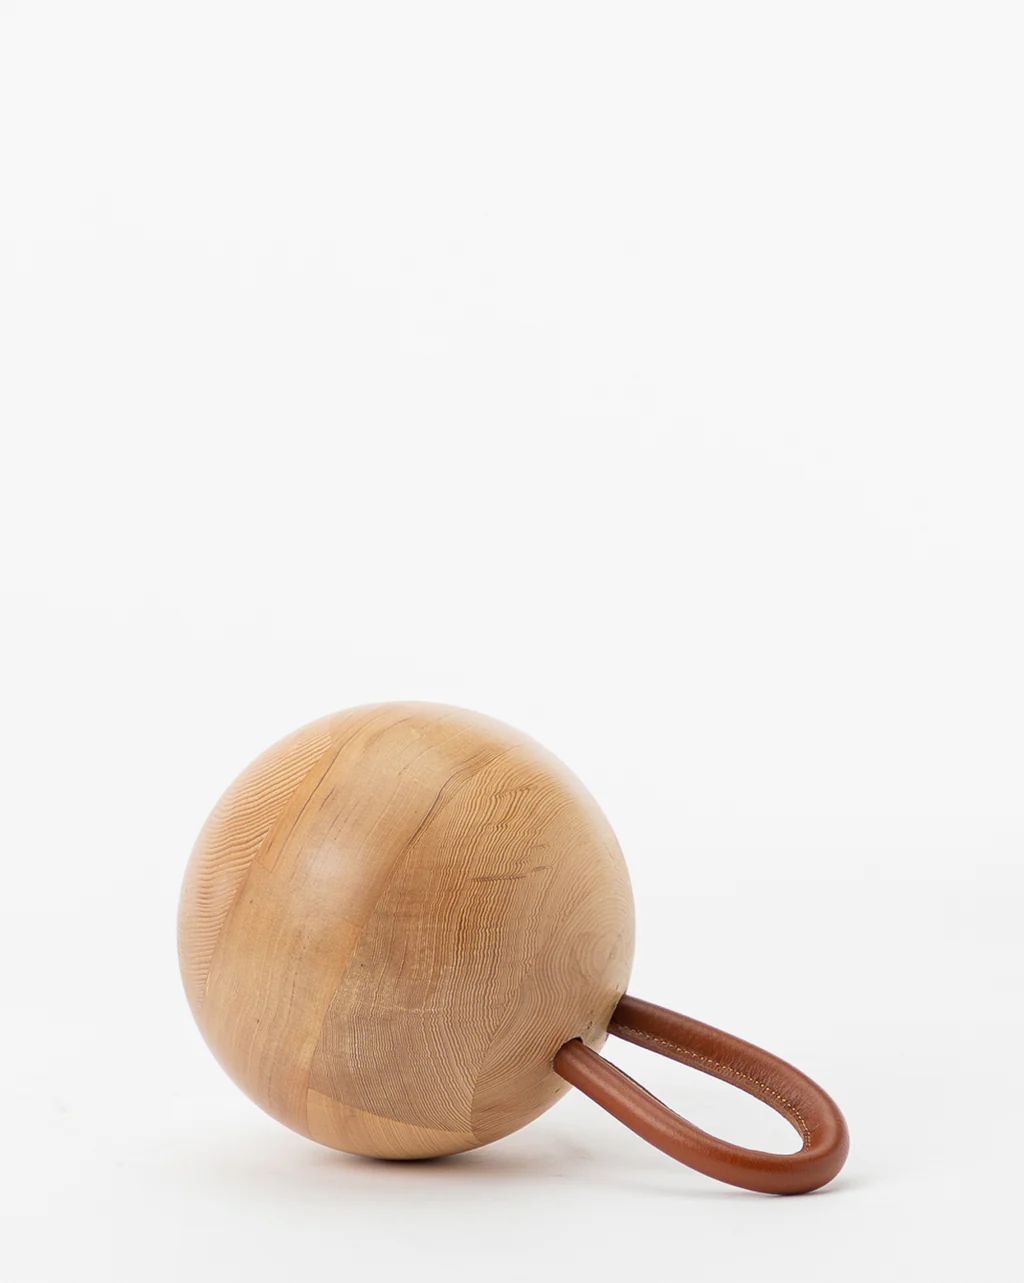 Leather Handled Wood Ball Object | McGee & Co.